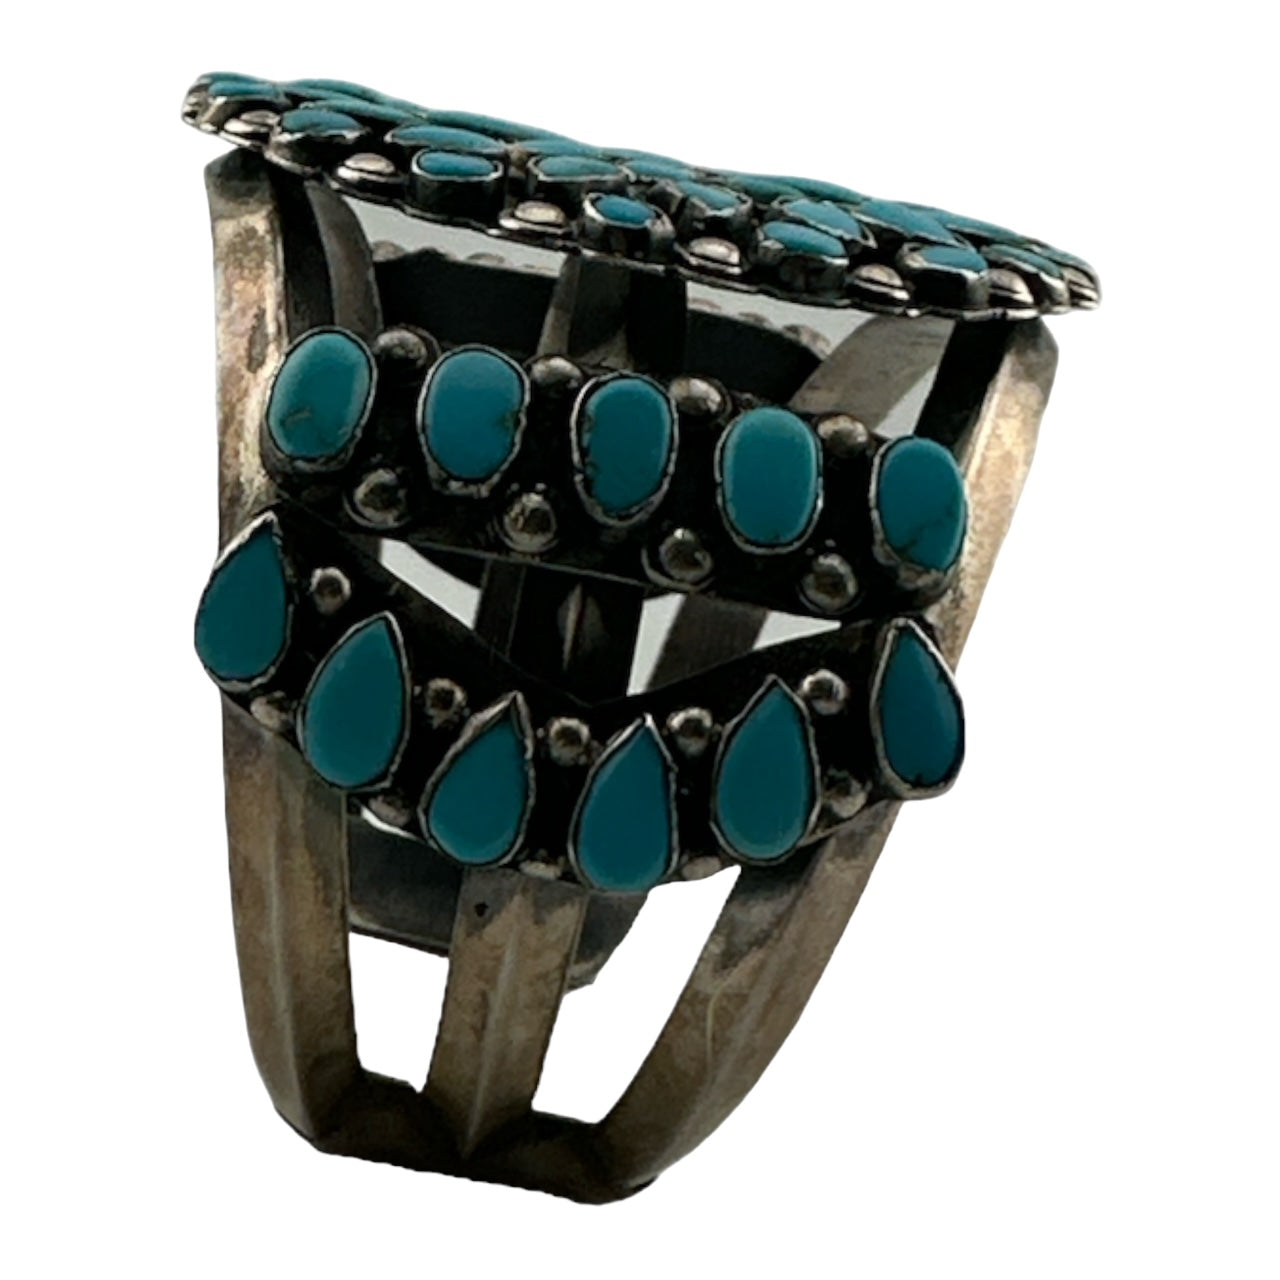 Zuni Vintage Turquoise Cluster Bracelet, authentic navajo jewelry for sale, telluride jewelry store, telluride gallery